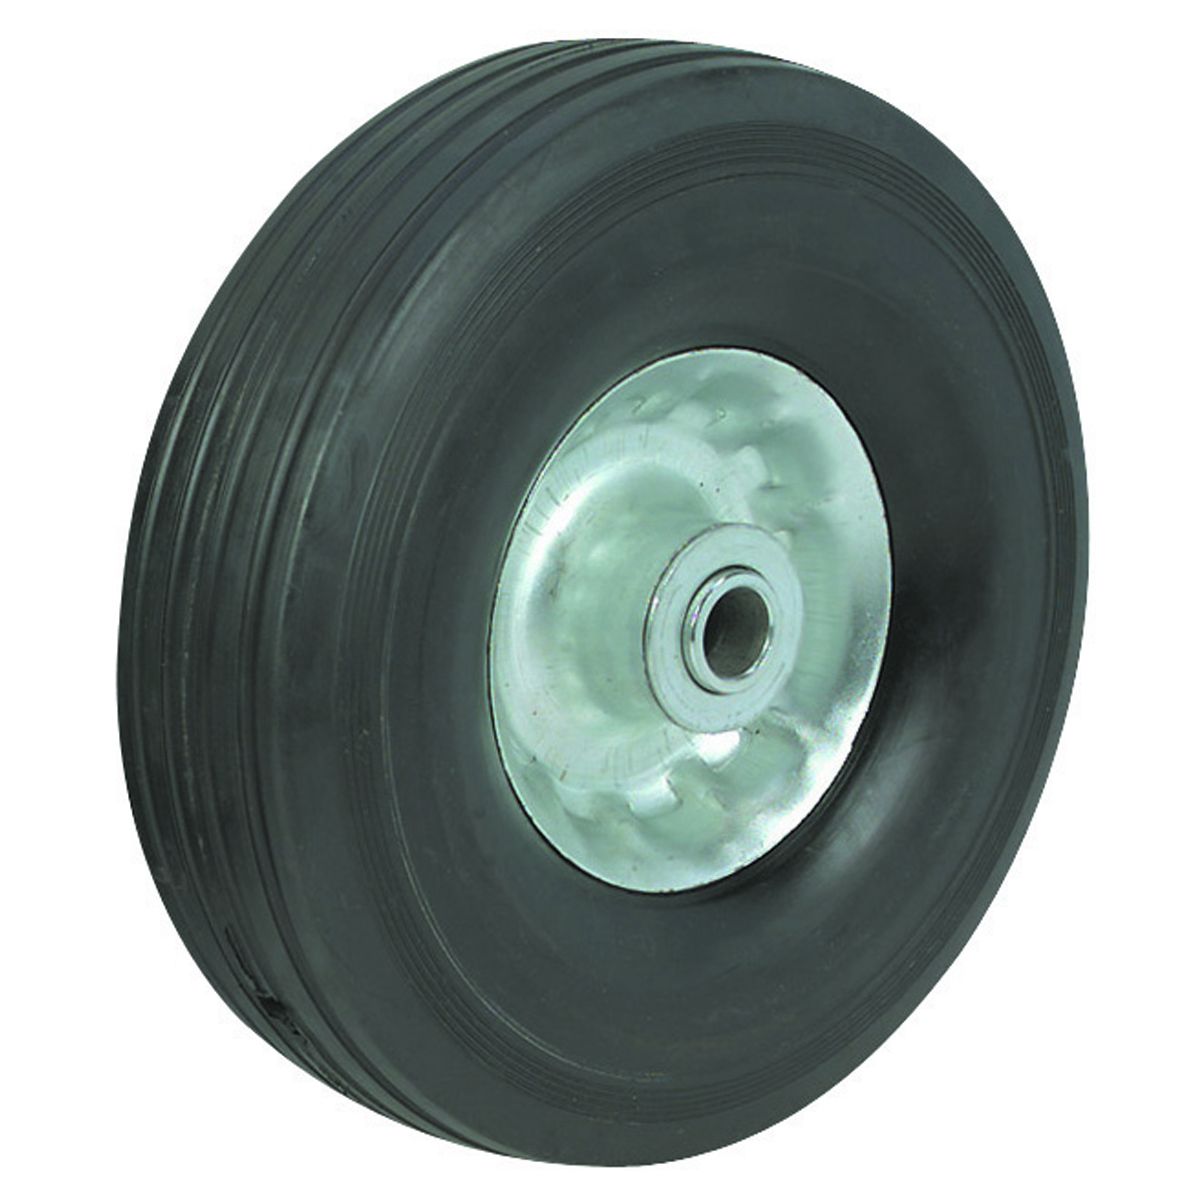 HAUL-MASTER 10 in. Solid Rubber Tire with Steel Hub